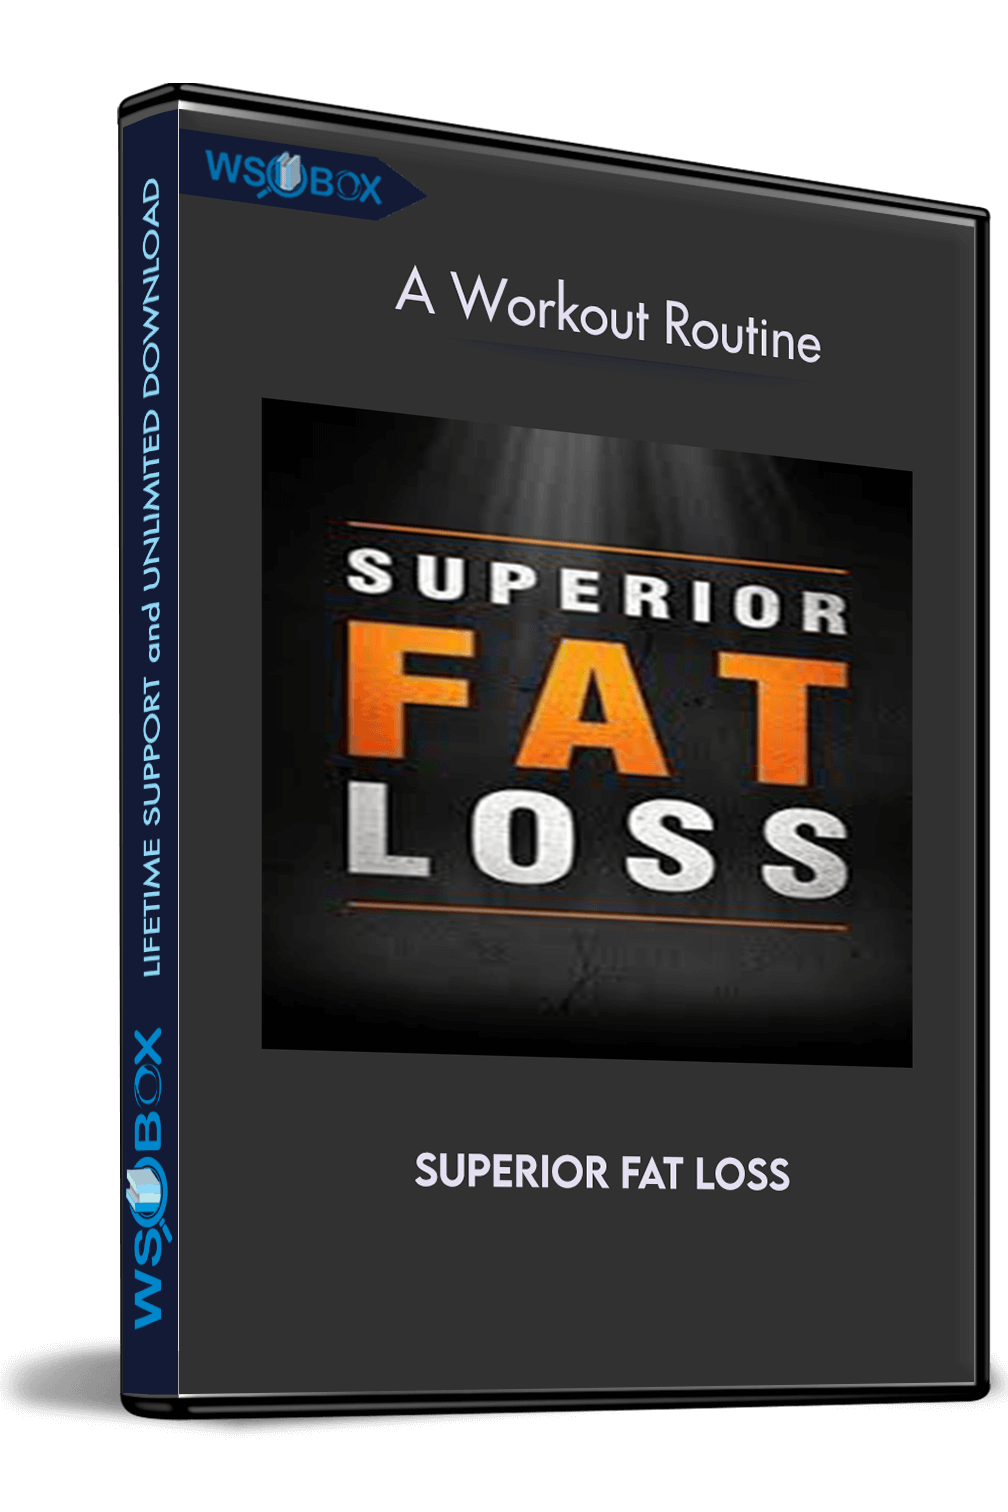 Superior Fat Loss – A Workout Routine